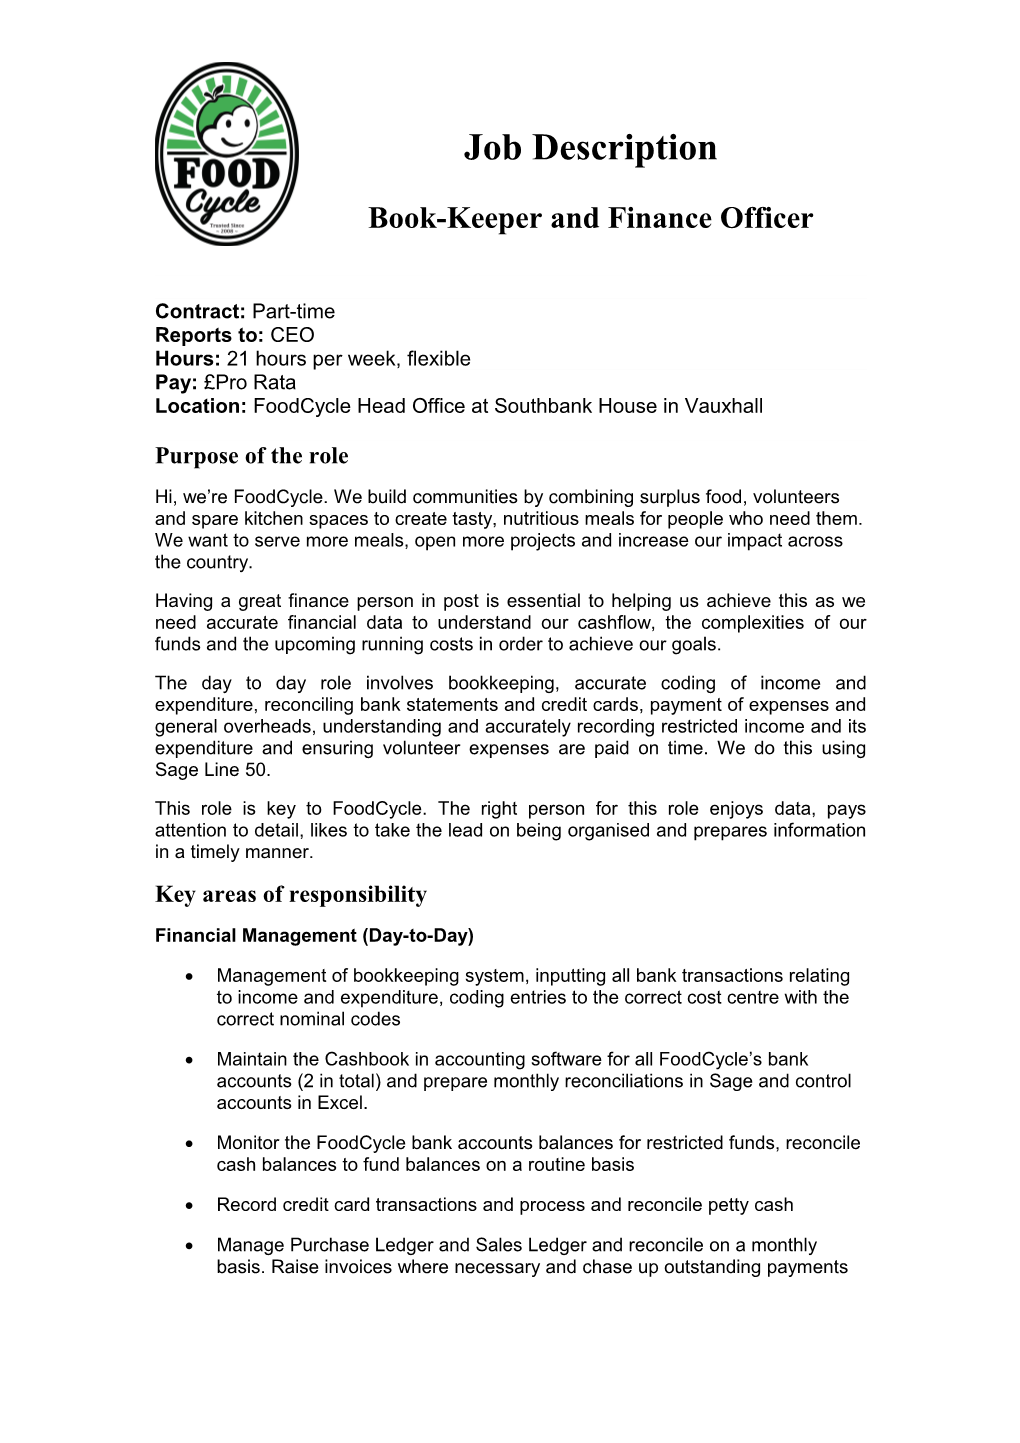 Book-Keeper and Finance Officer